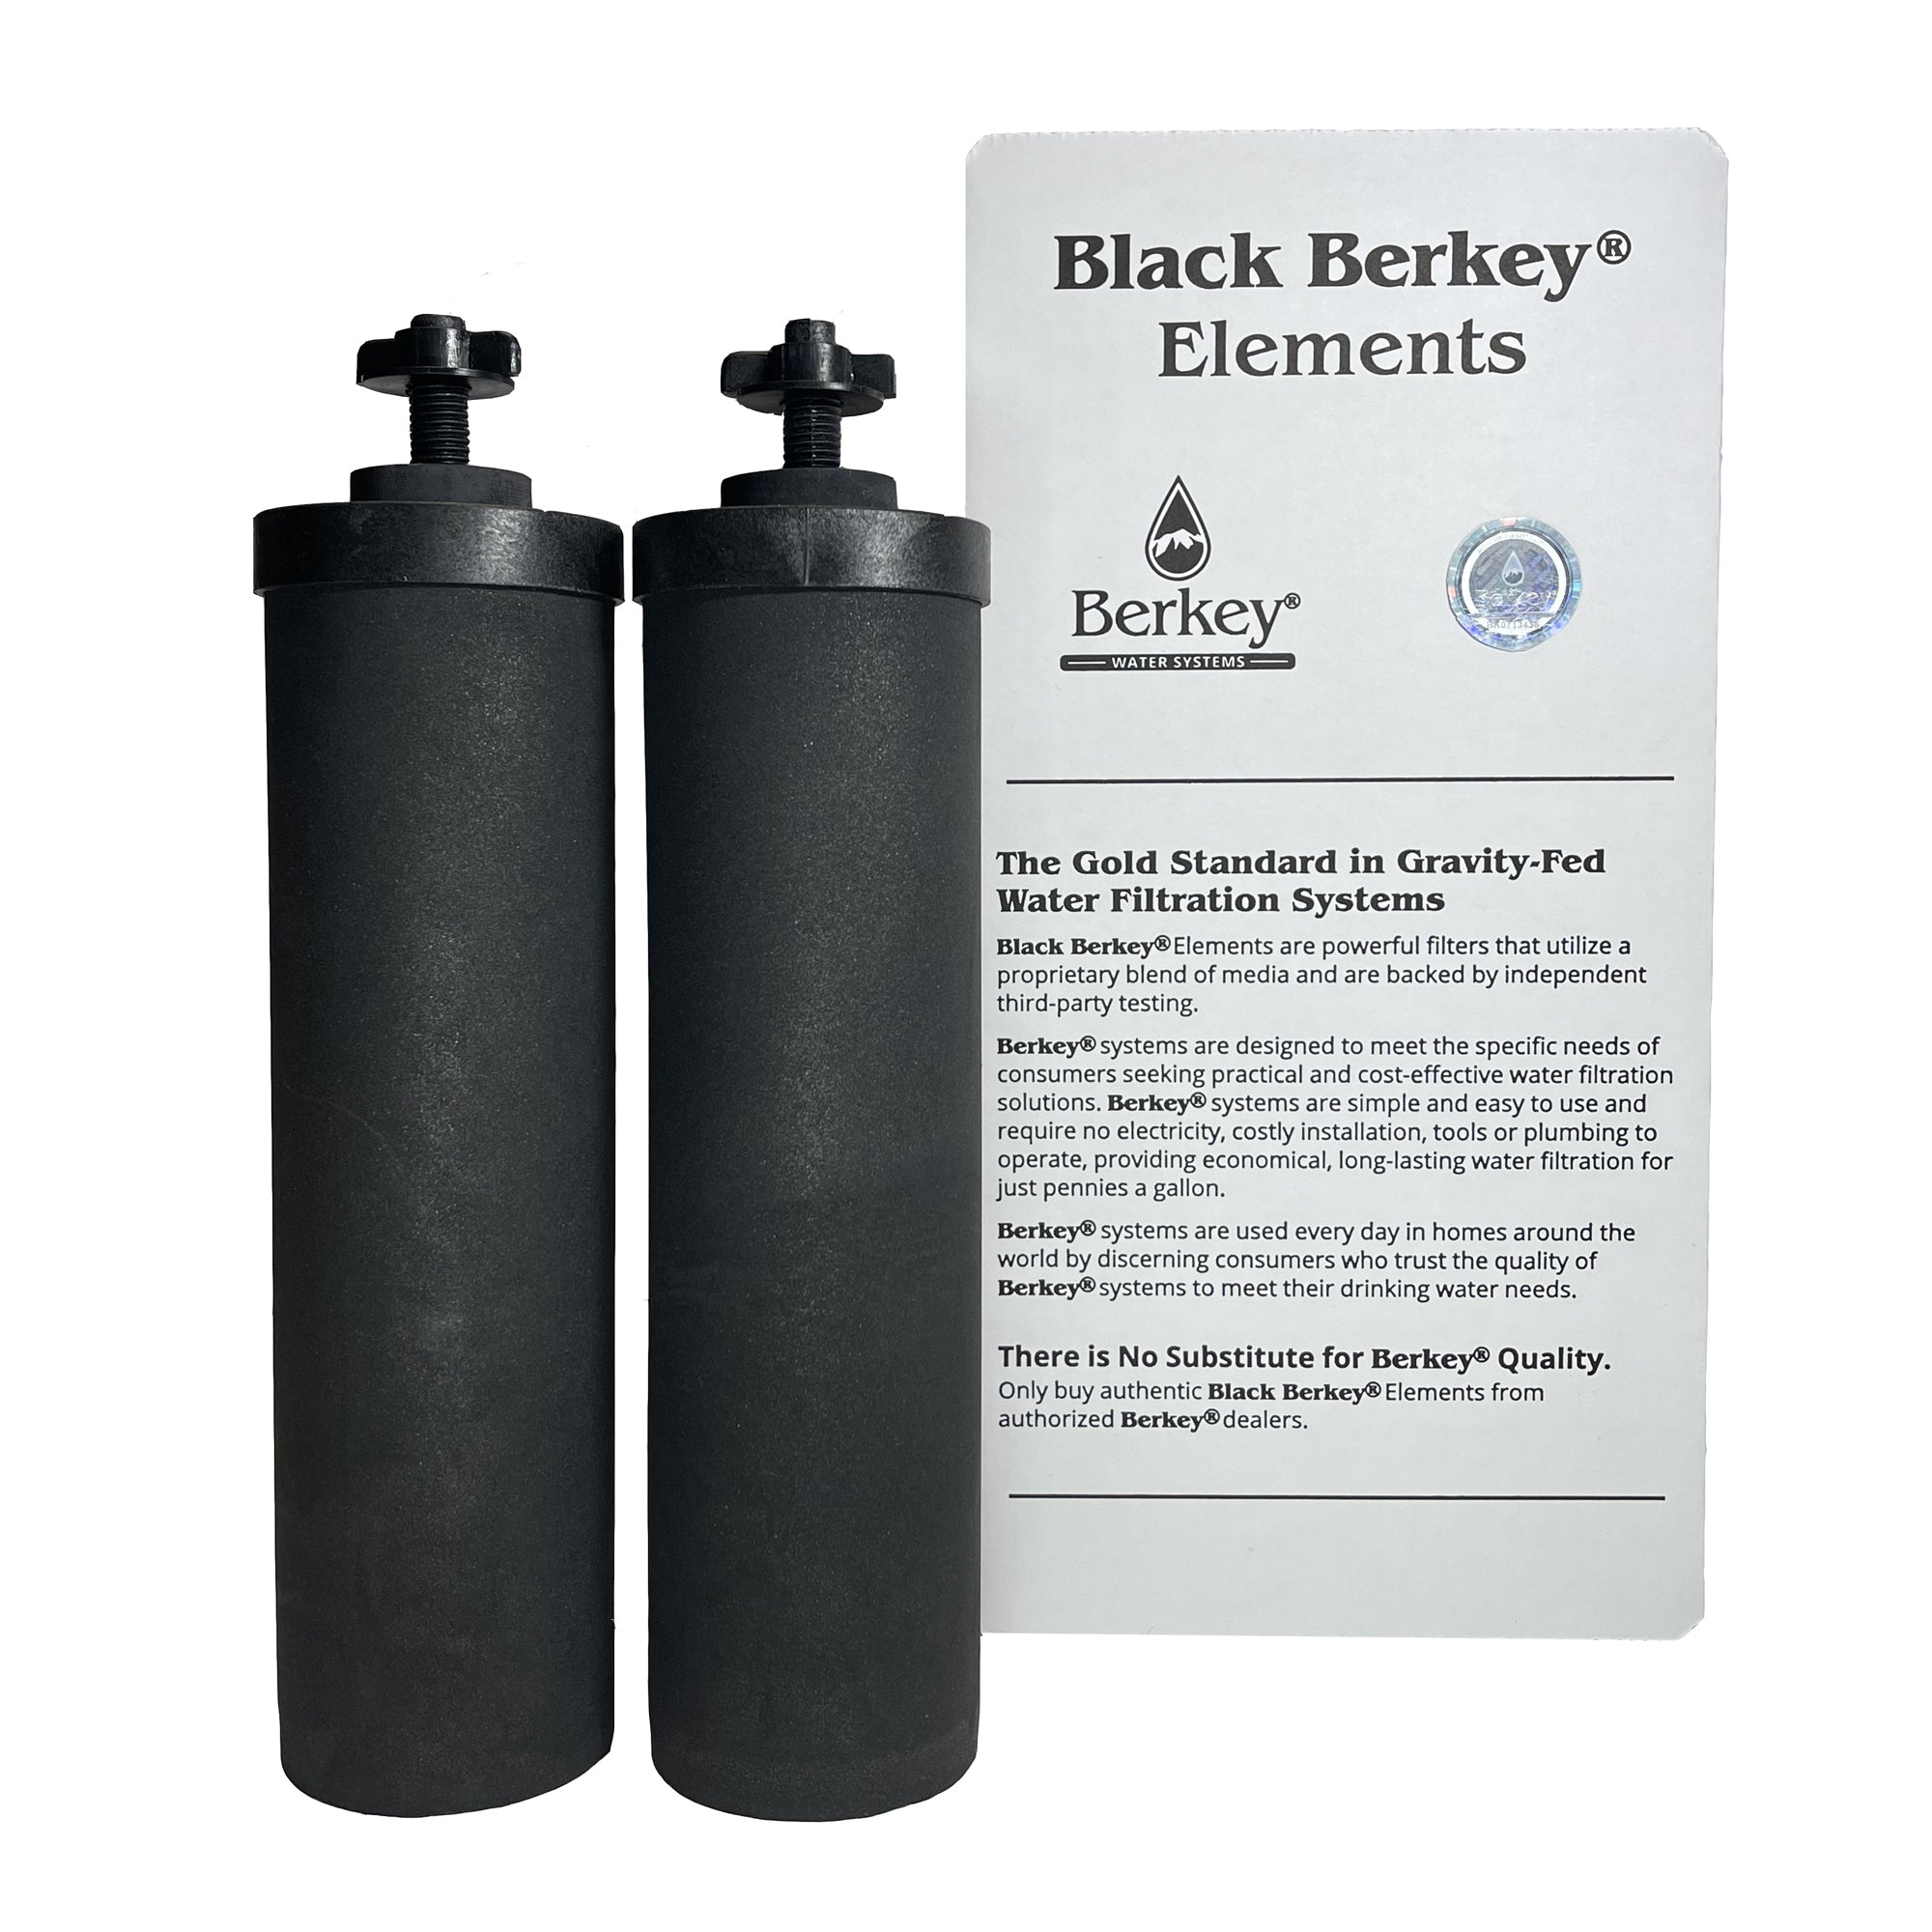 Travel Berkey Gravity-Fed Water Filter with 2 Black Berkey Elements–Enjoy  Potable Water While Camping, RVing, Off-Grid, Emergencies, Every Day at  Home - Kitchen Countertop Water Filters 